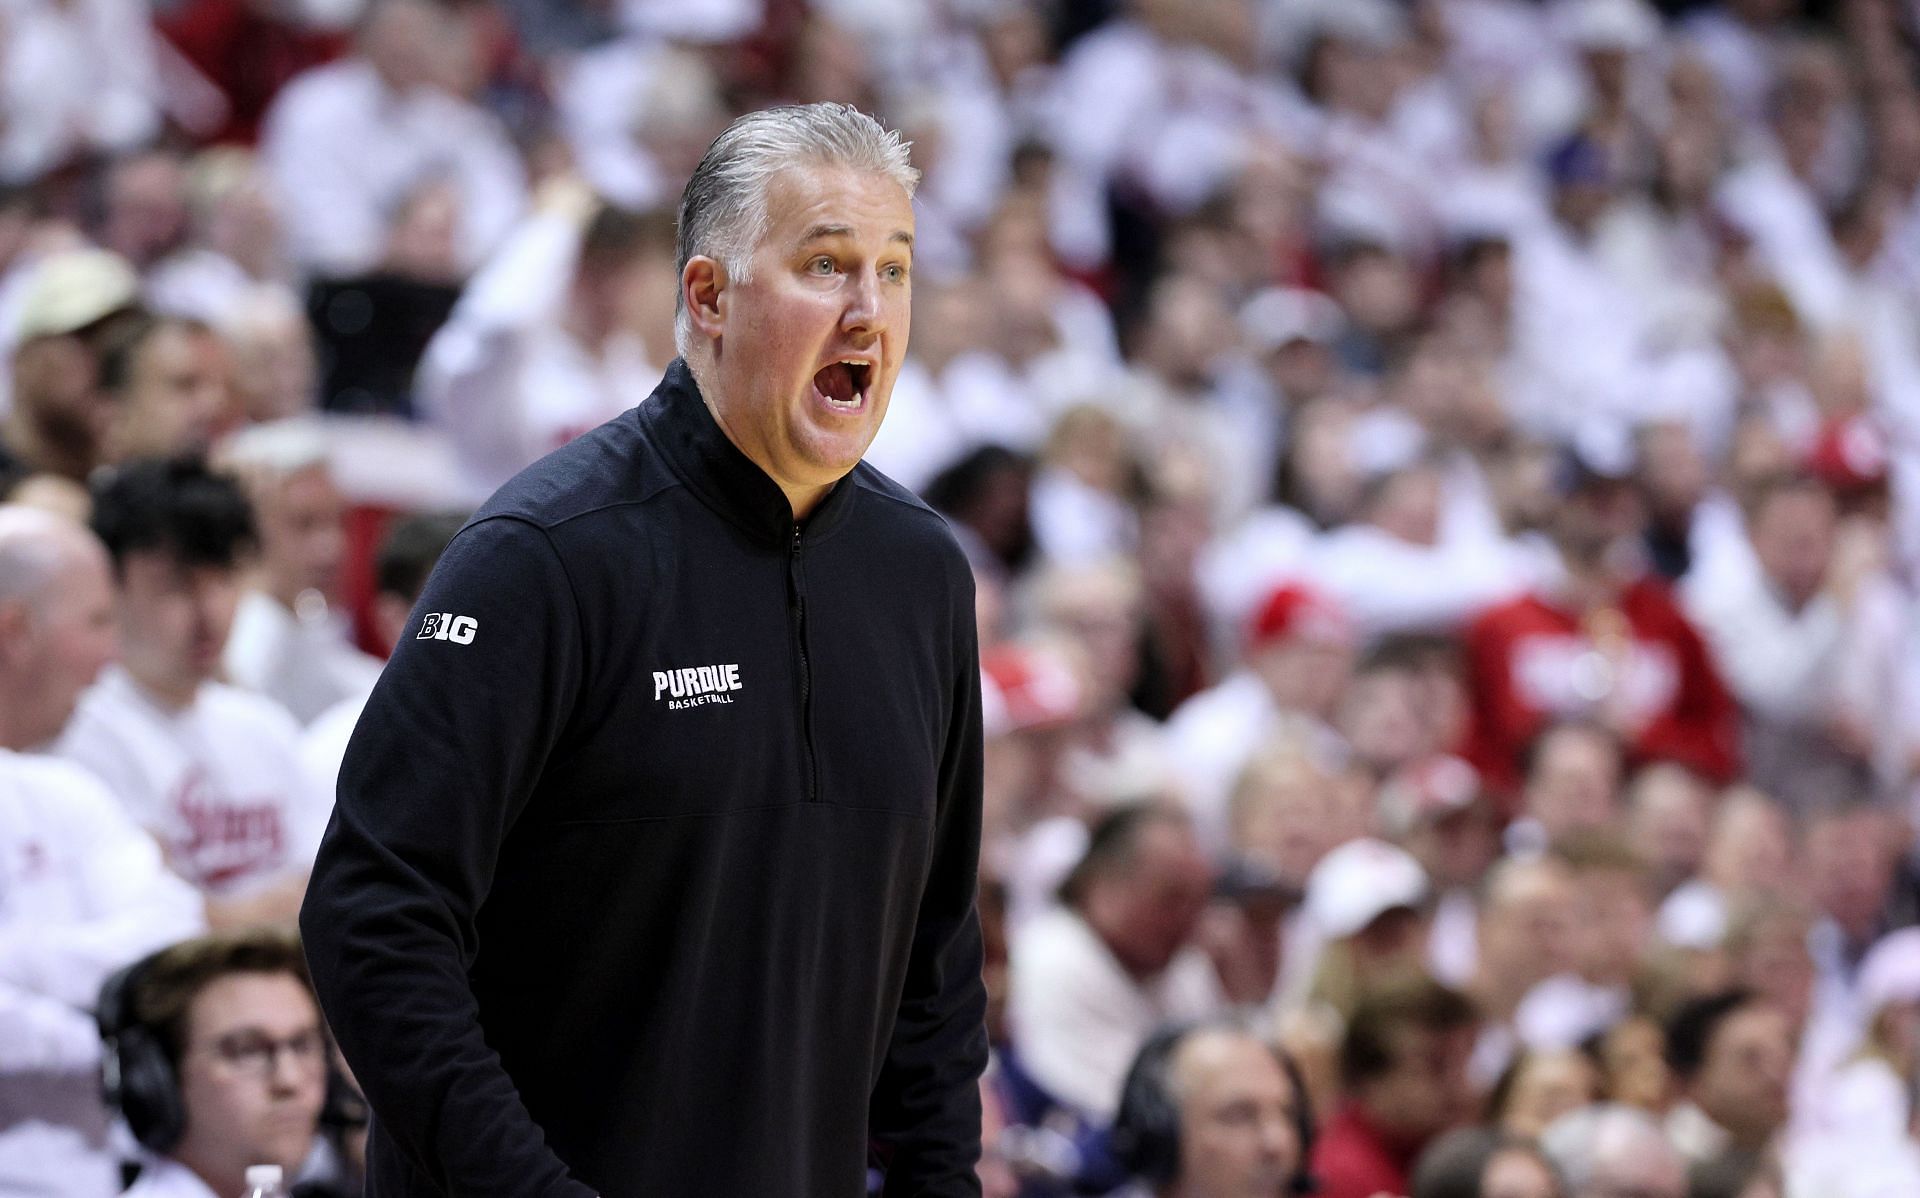 Purdue coach Matt Painter is one of five coaches who have held their current jobs since 2005, tying him for the 10th longest tenure of active college basketball coaches.